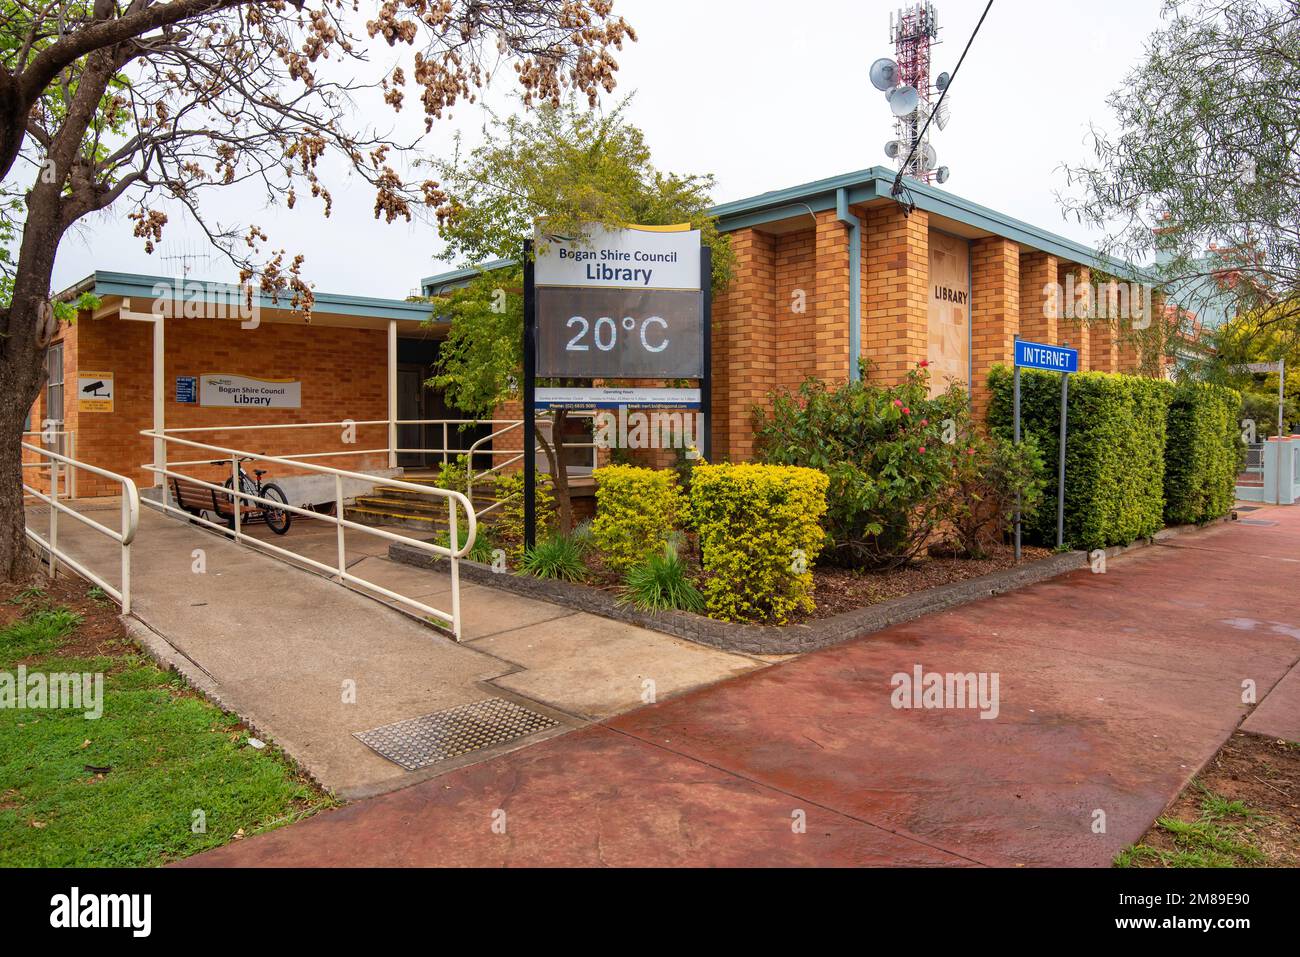 The mid-century modern style, Nyngan public library, in northwest New South Wales, Australia, displays an electronic temperature reading and INTERNET Stock Photo